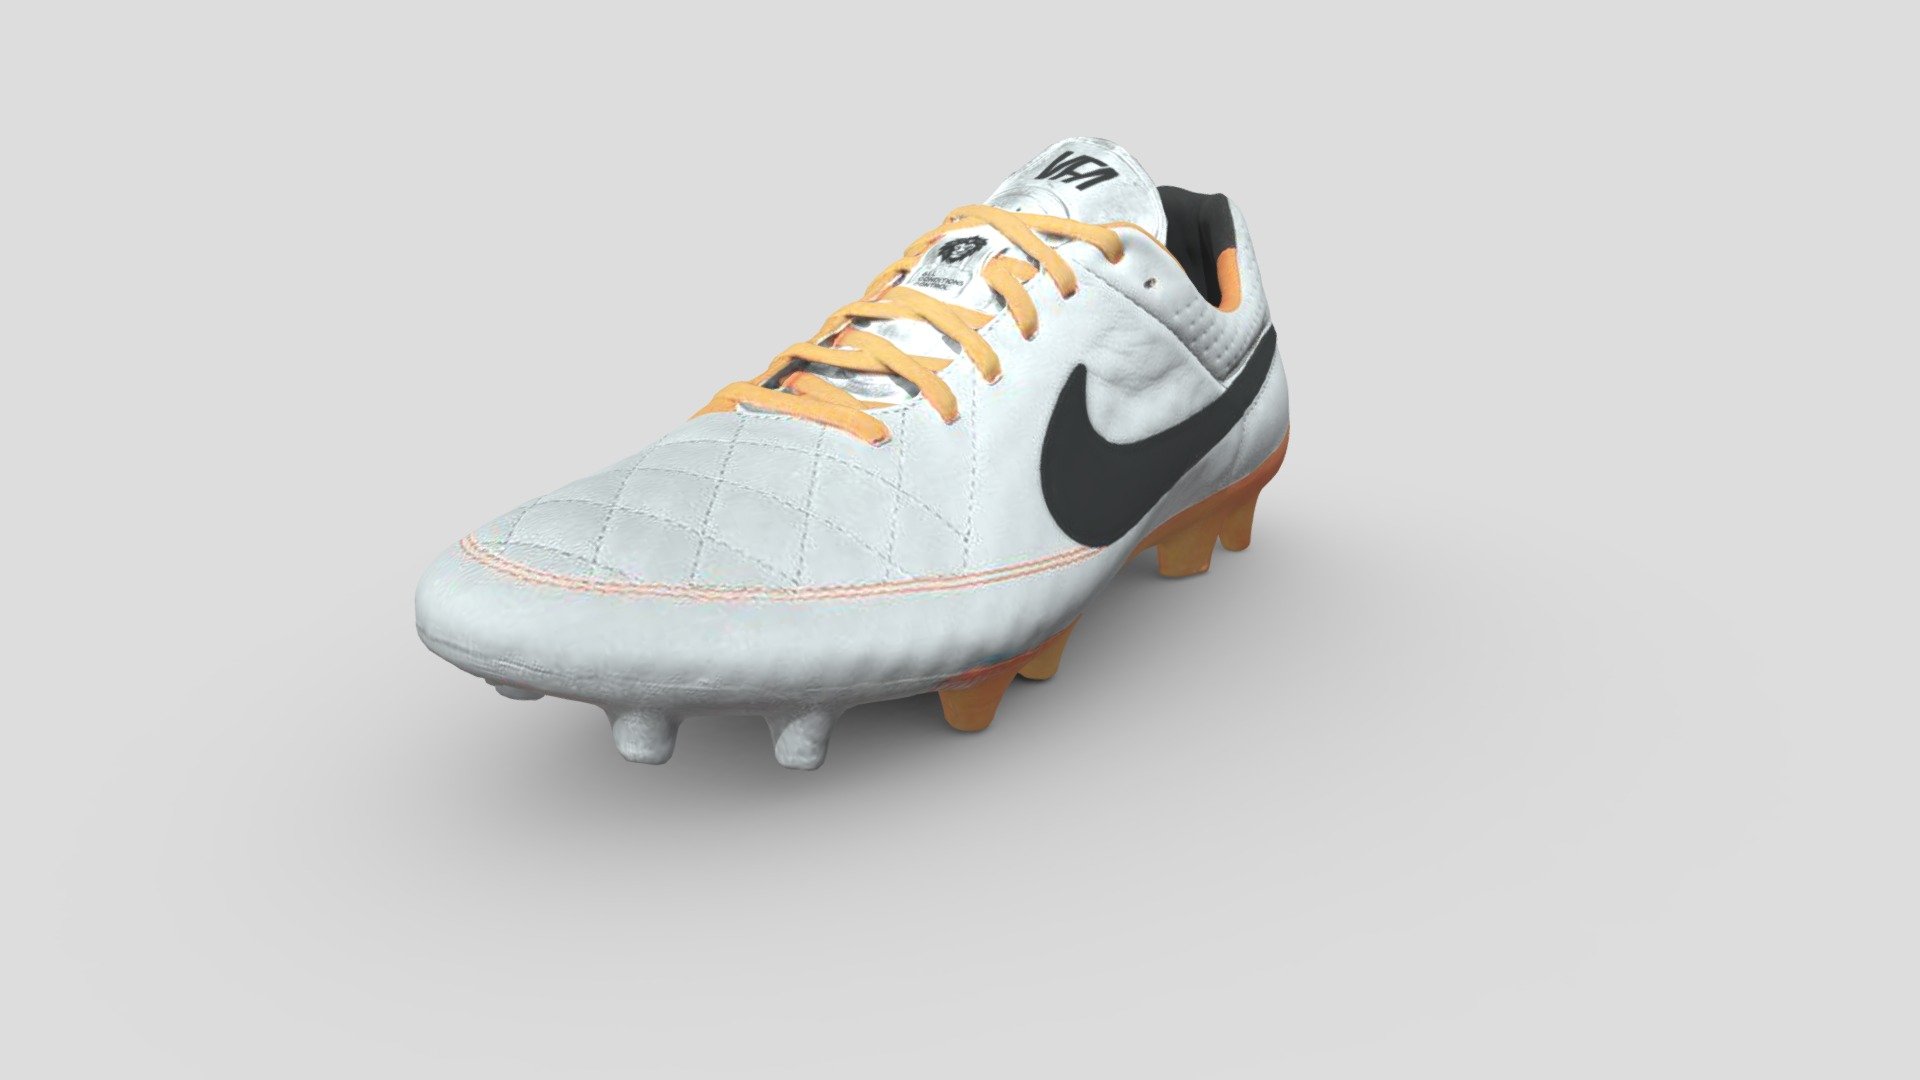 An in-depth exploration of a 3D-rendered soccer model boot, detailing each component and its significance in gameplay dynamics and performance.

Model remixed from Nike Tiempo Legend 3d model